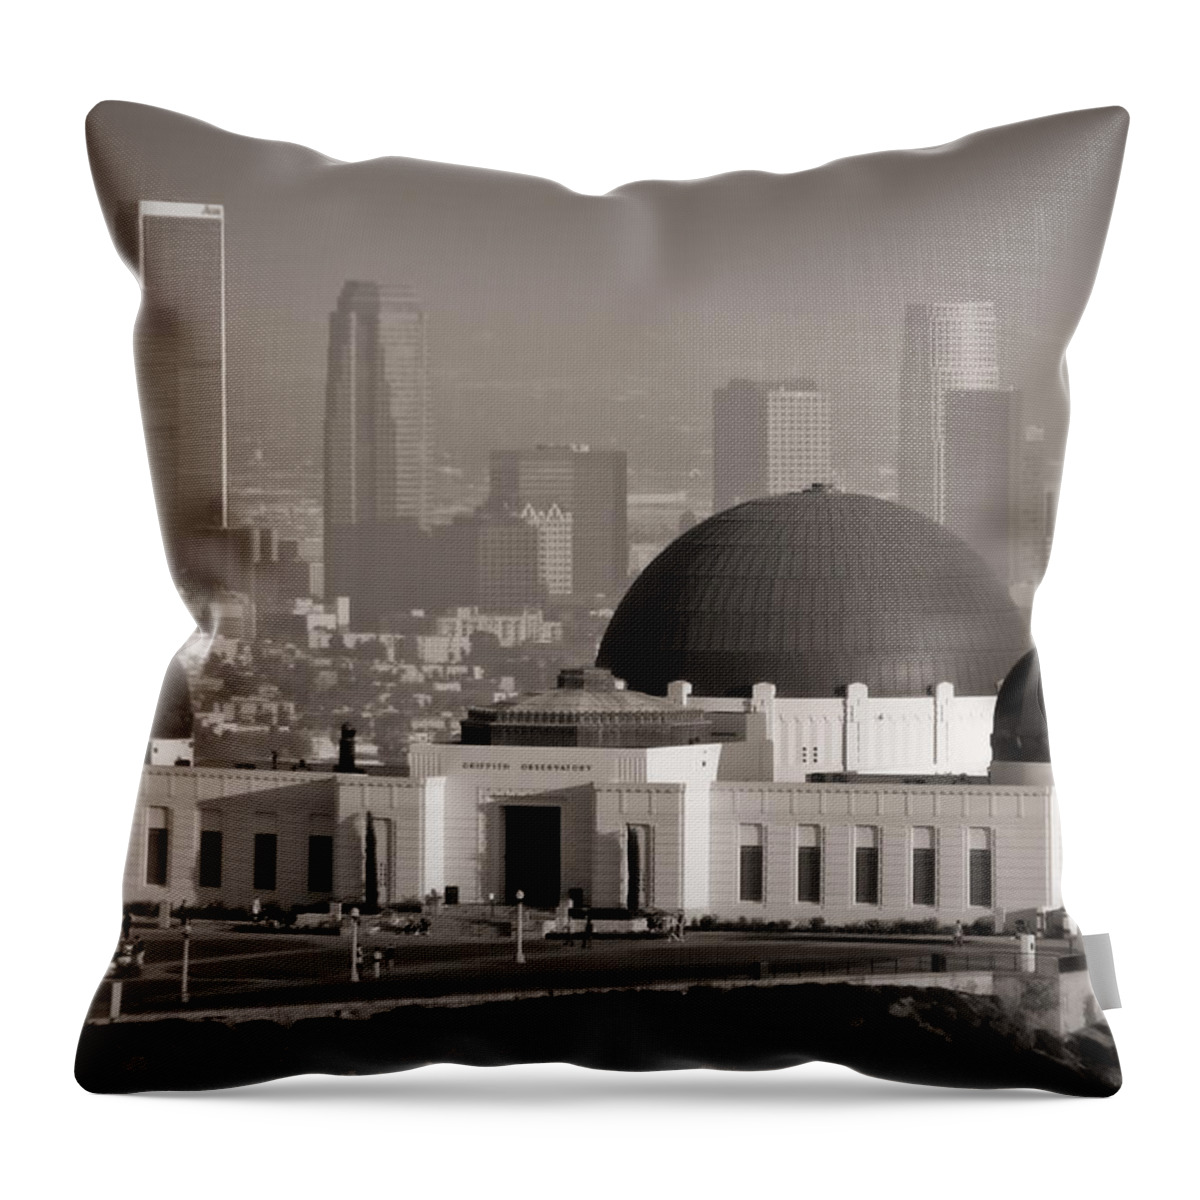 3scape Throw Pillow featuring the photograph Griffith Observatory by Adam Romanowicz